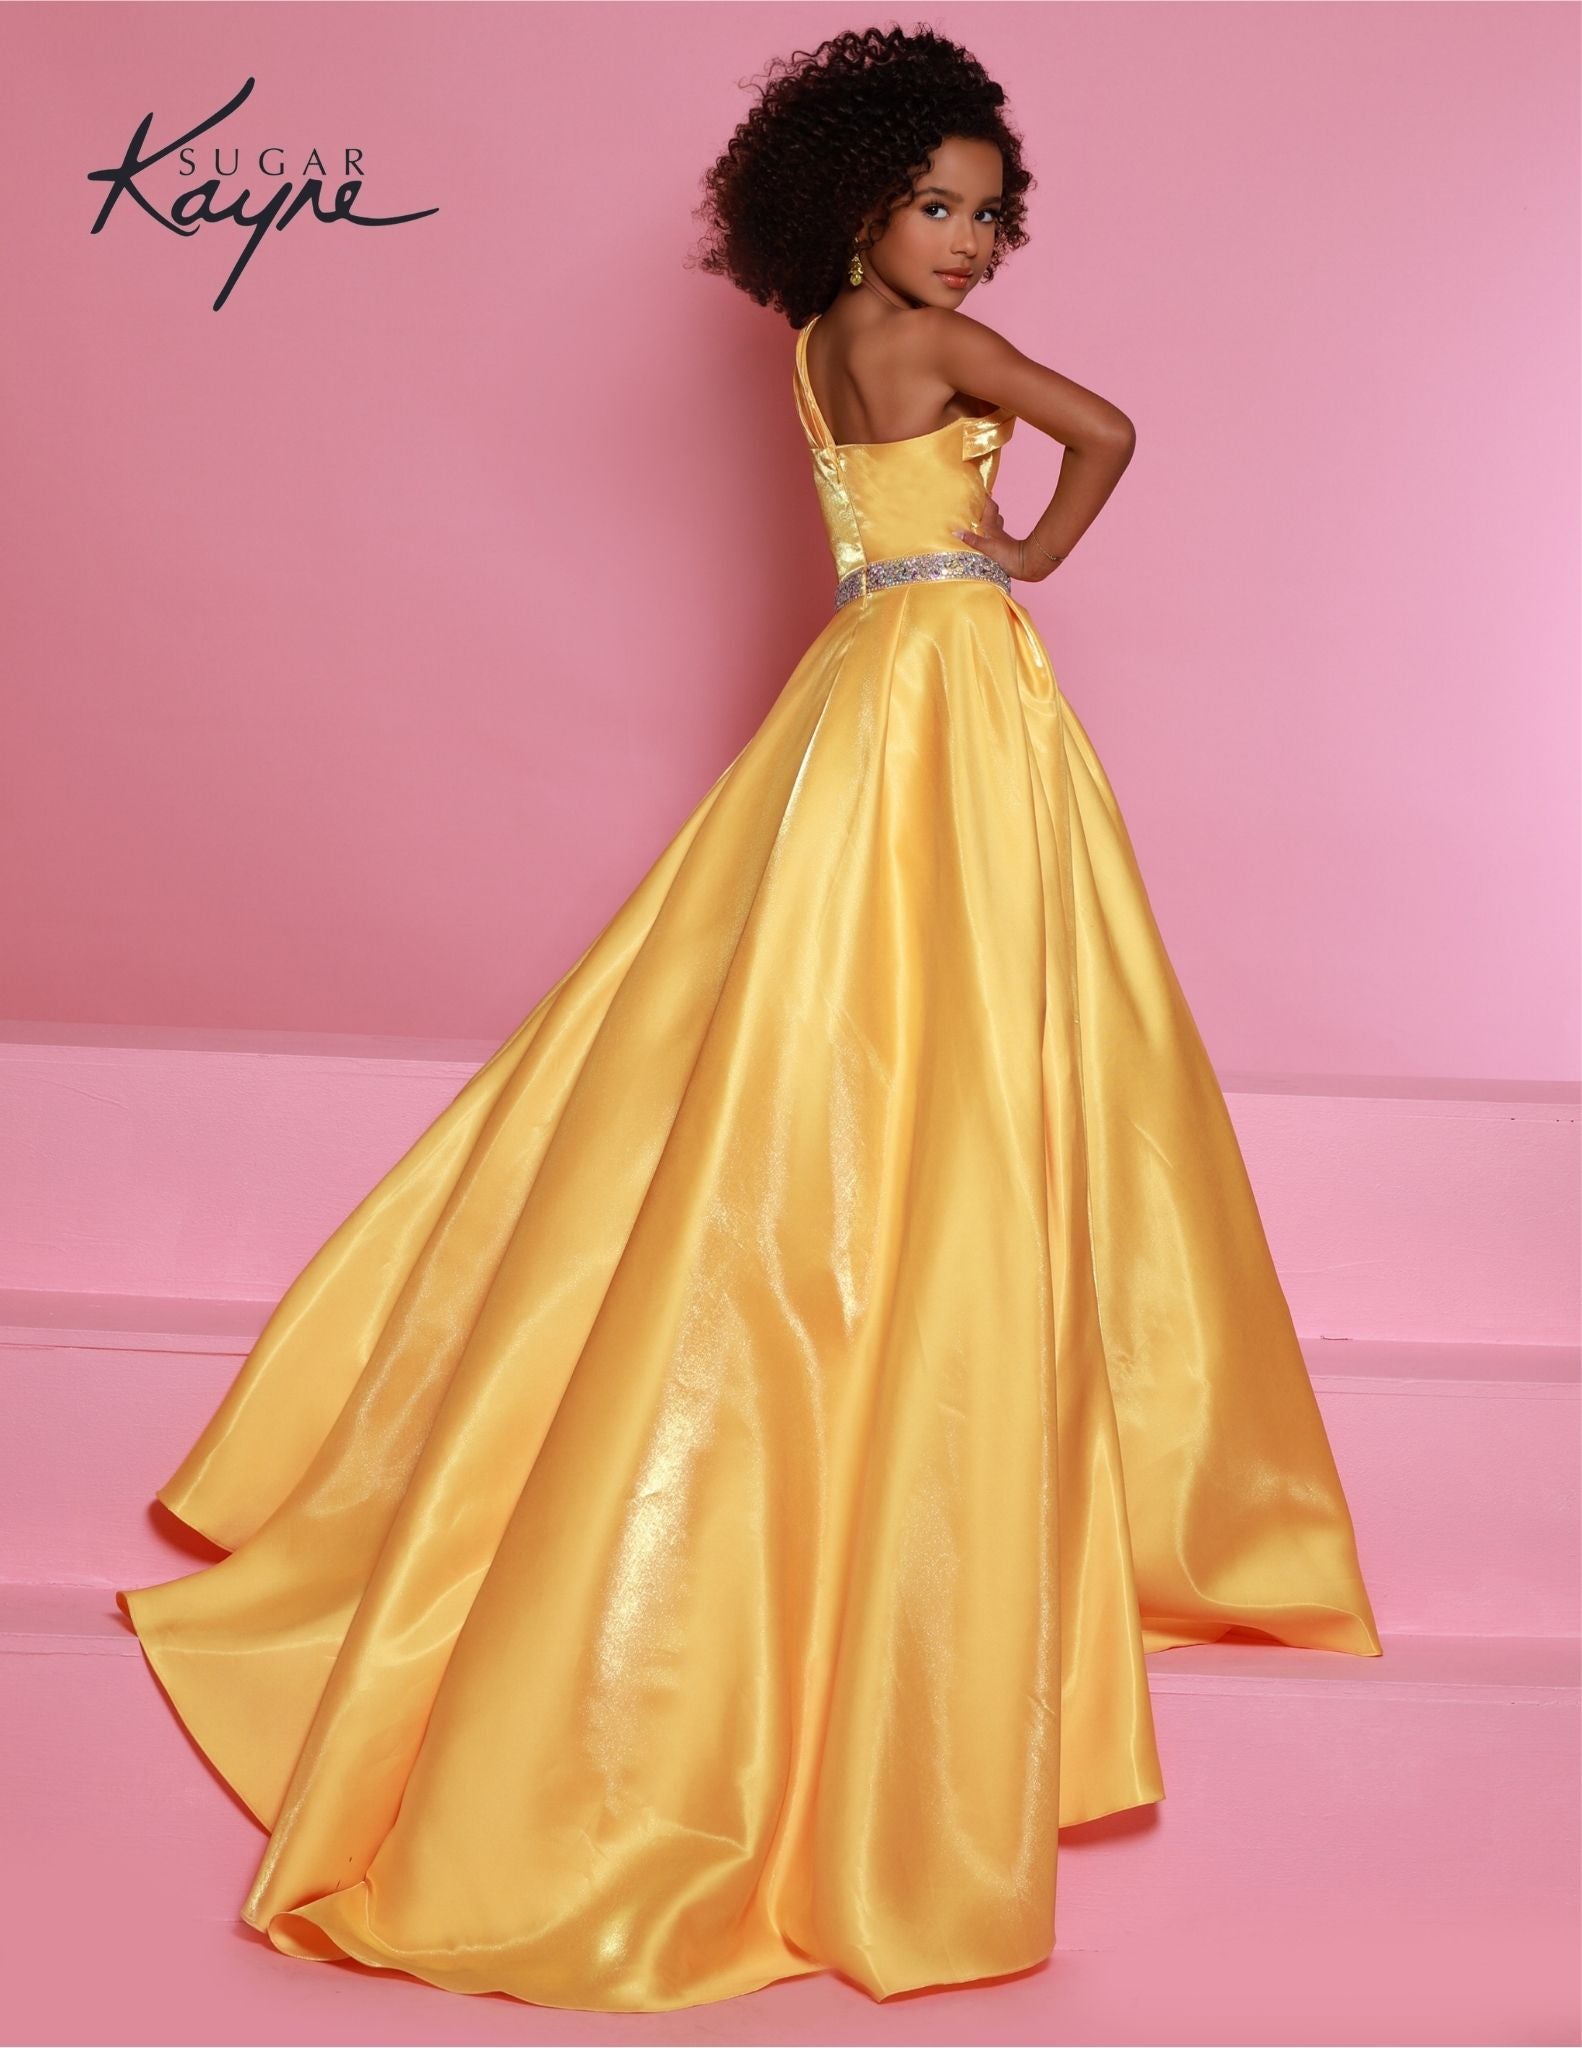 Sugar Kayne C312 Marigold Yellow Girls and Preteens Satin Pageant Dress Long A Line One Shoulder Formal Gown Gathered Bodice